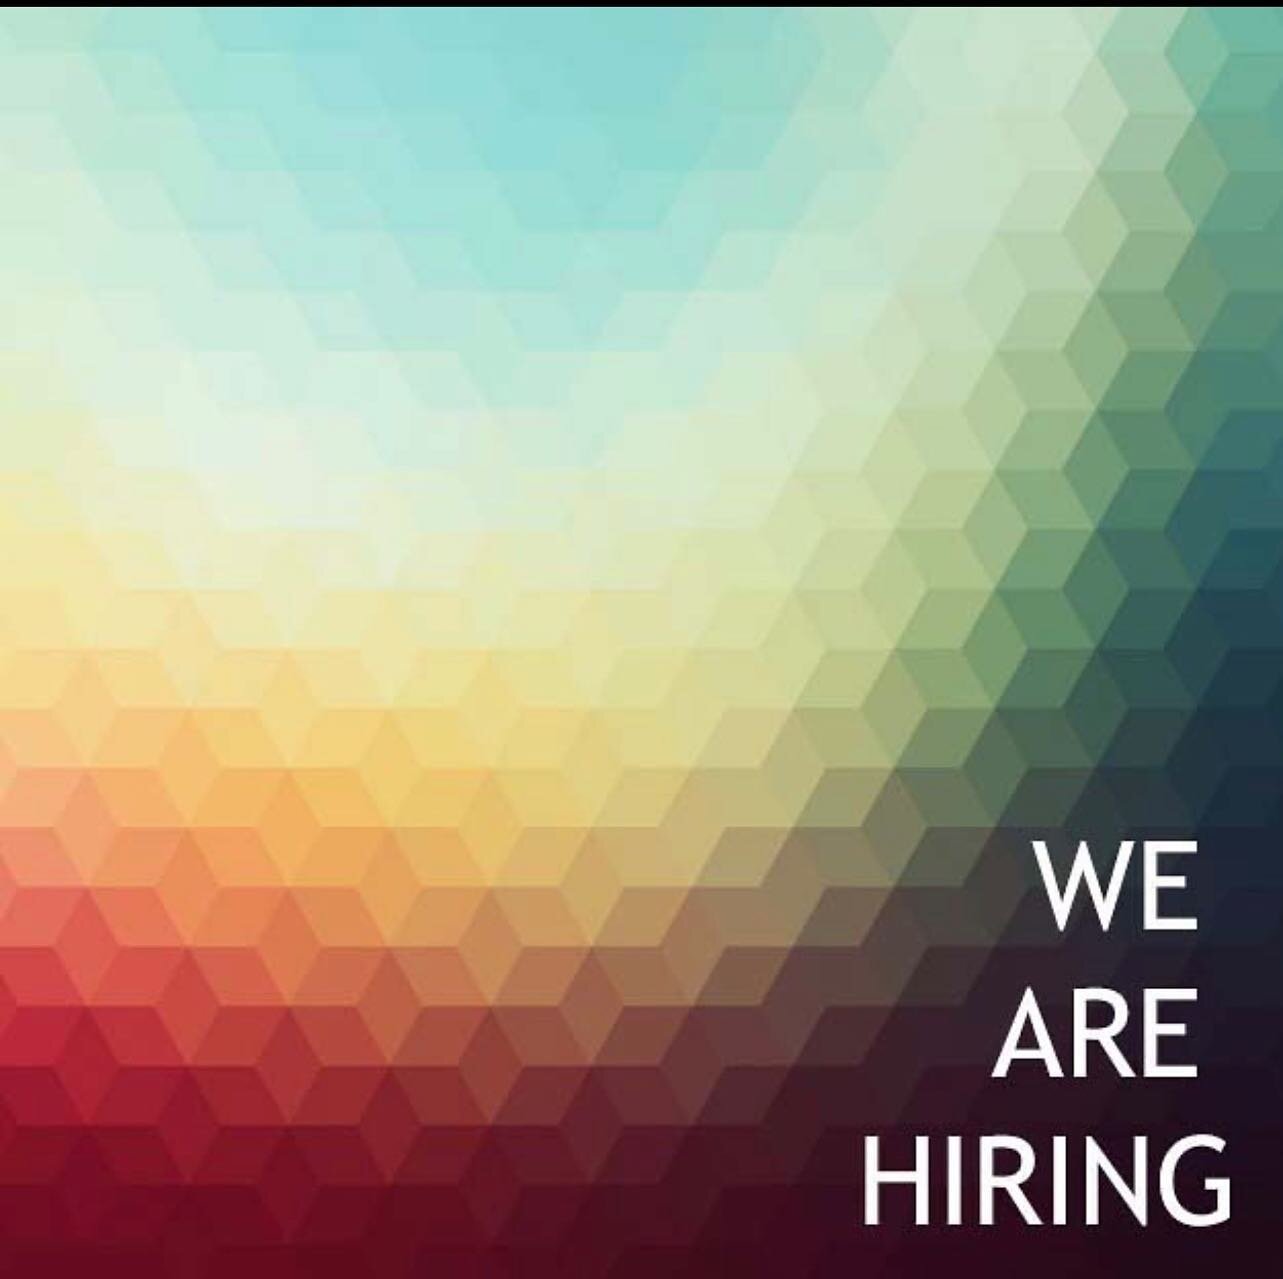 Looking for super star Senior Interior designers/Architects to join the team. Work on large architecture base building upgrades and workplaces. Package Neg. Darlinghurst. 
Send resume to andrew@theworldisround.com.au